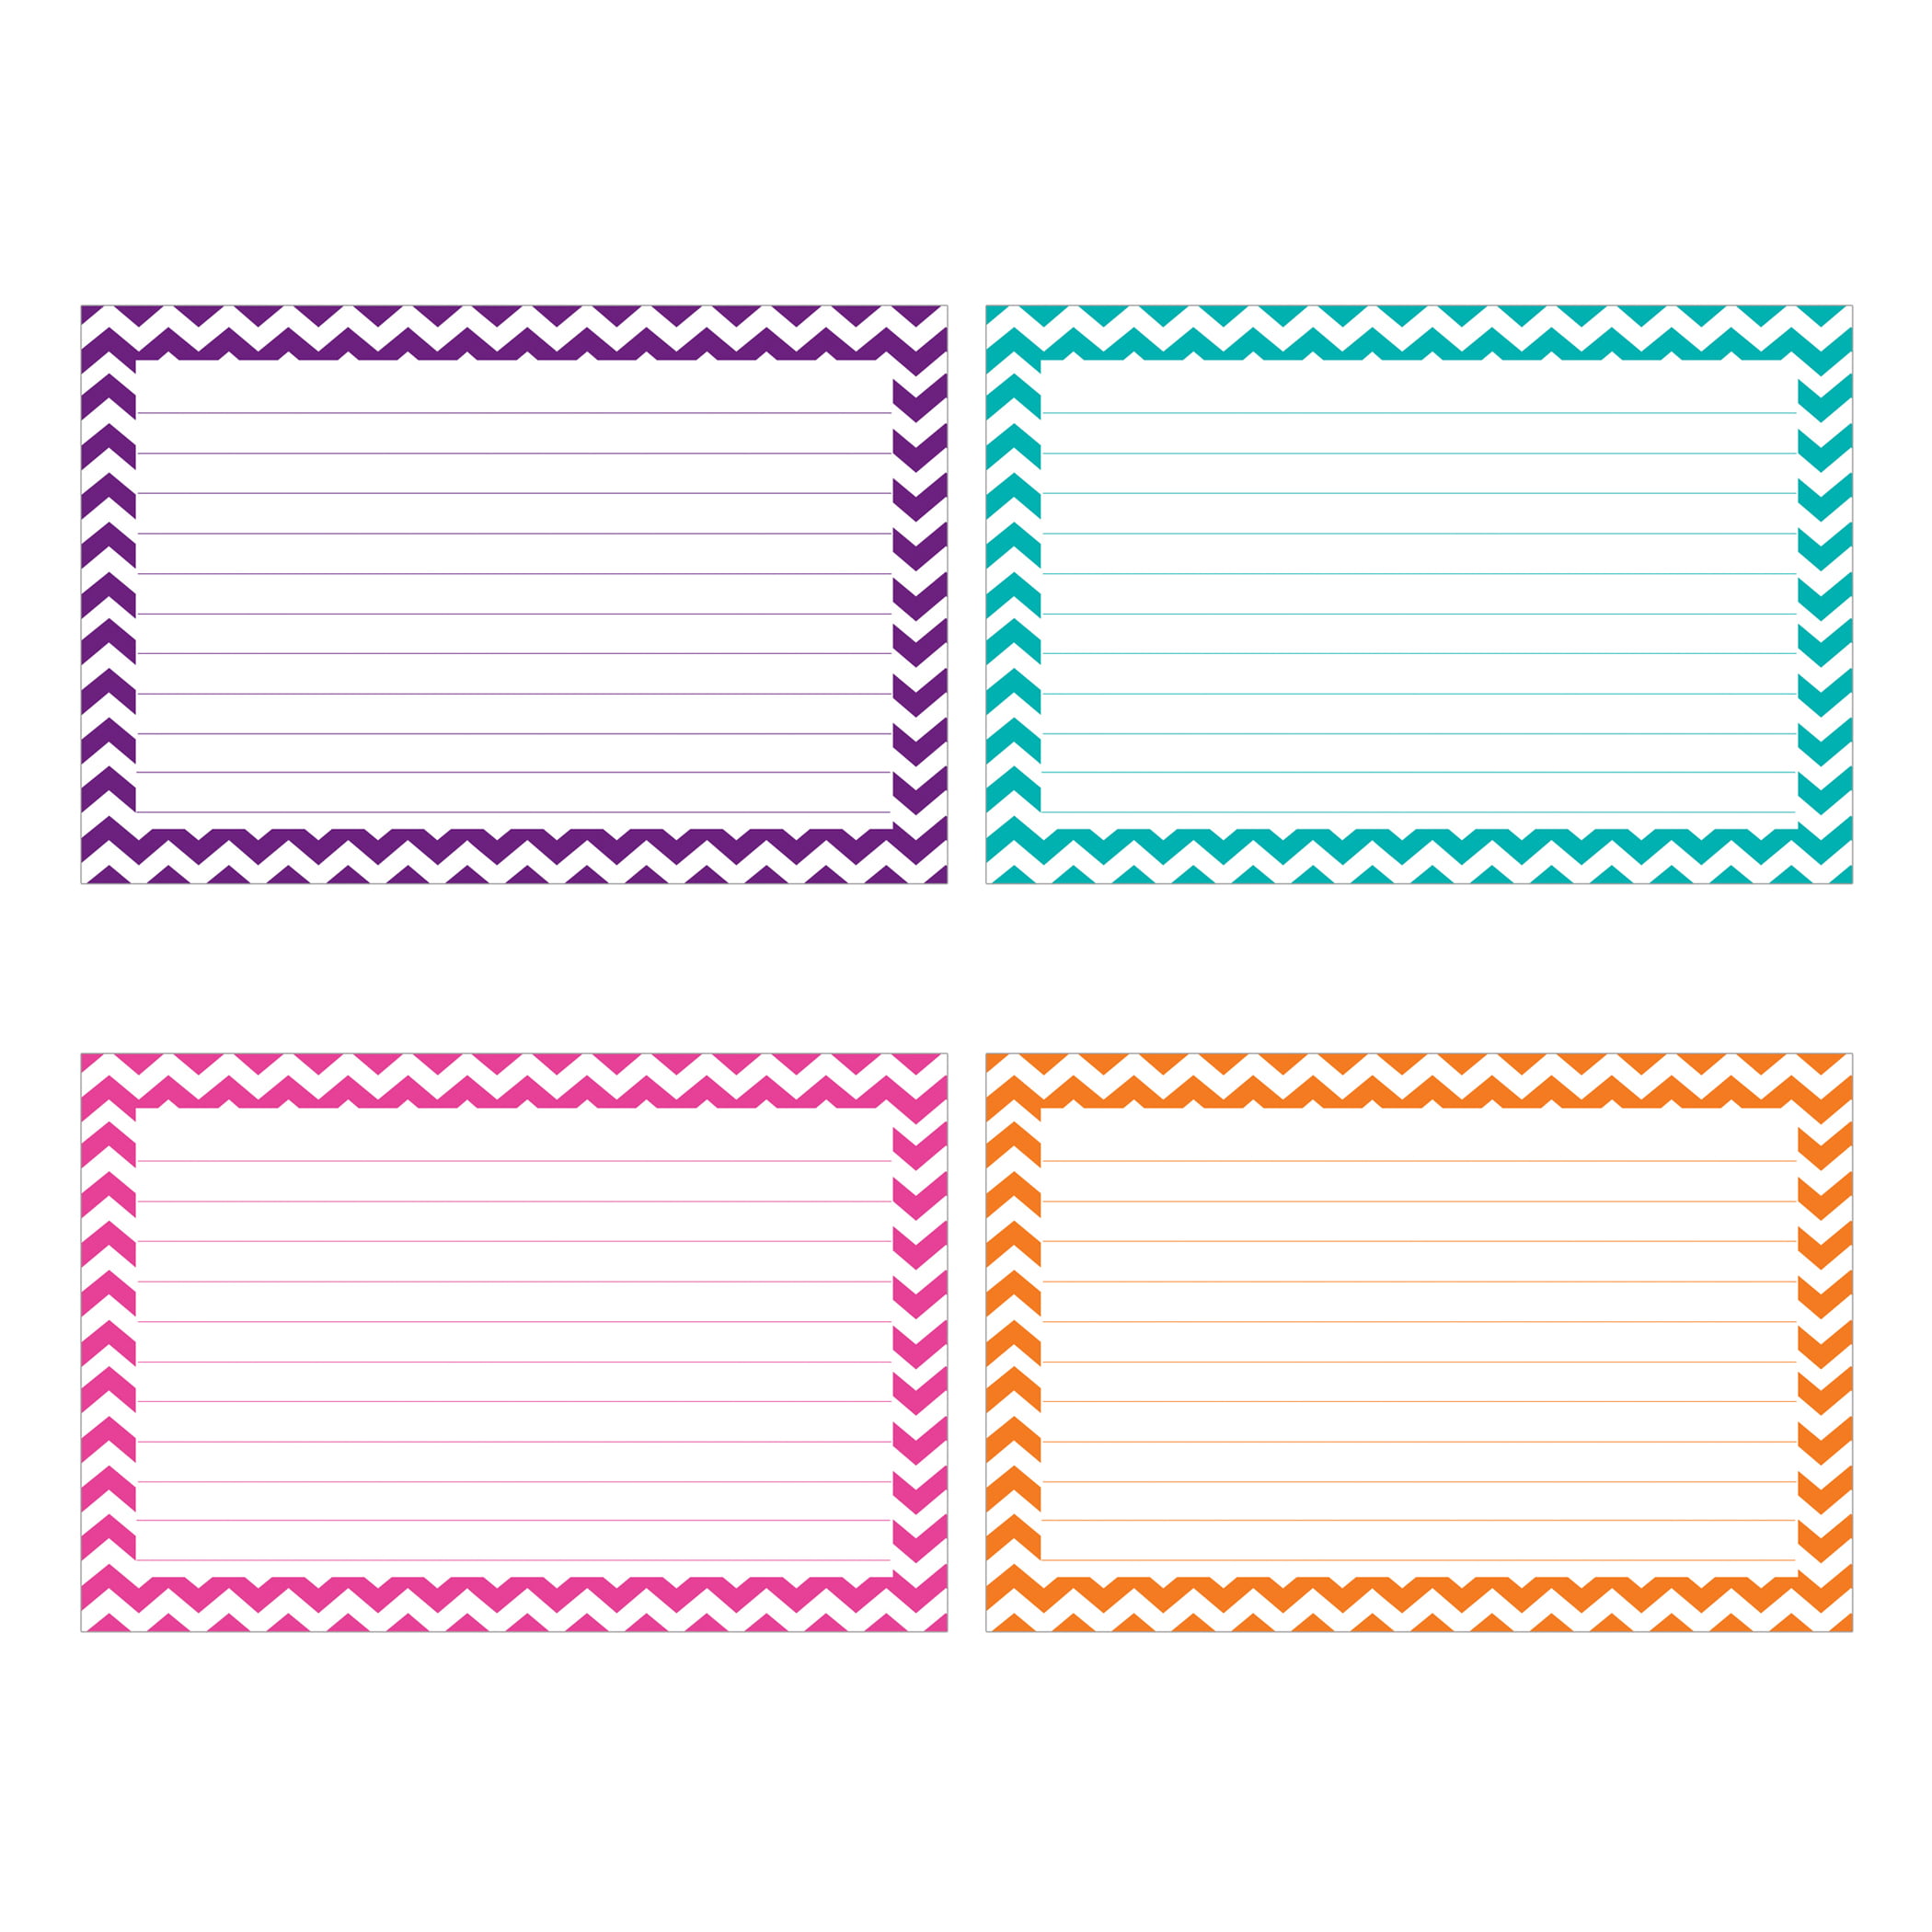 3 x 5 75 Count Chevron Assorted Top Notch Teacher Products Border Lined Index Cards 